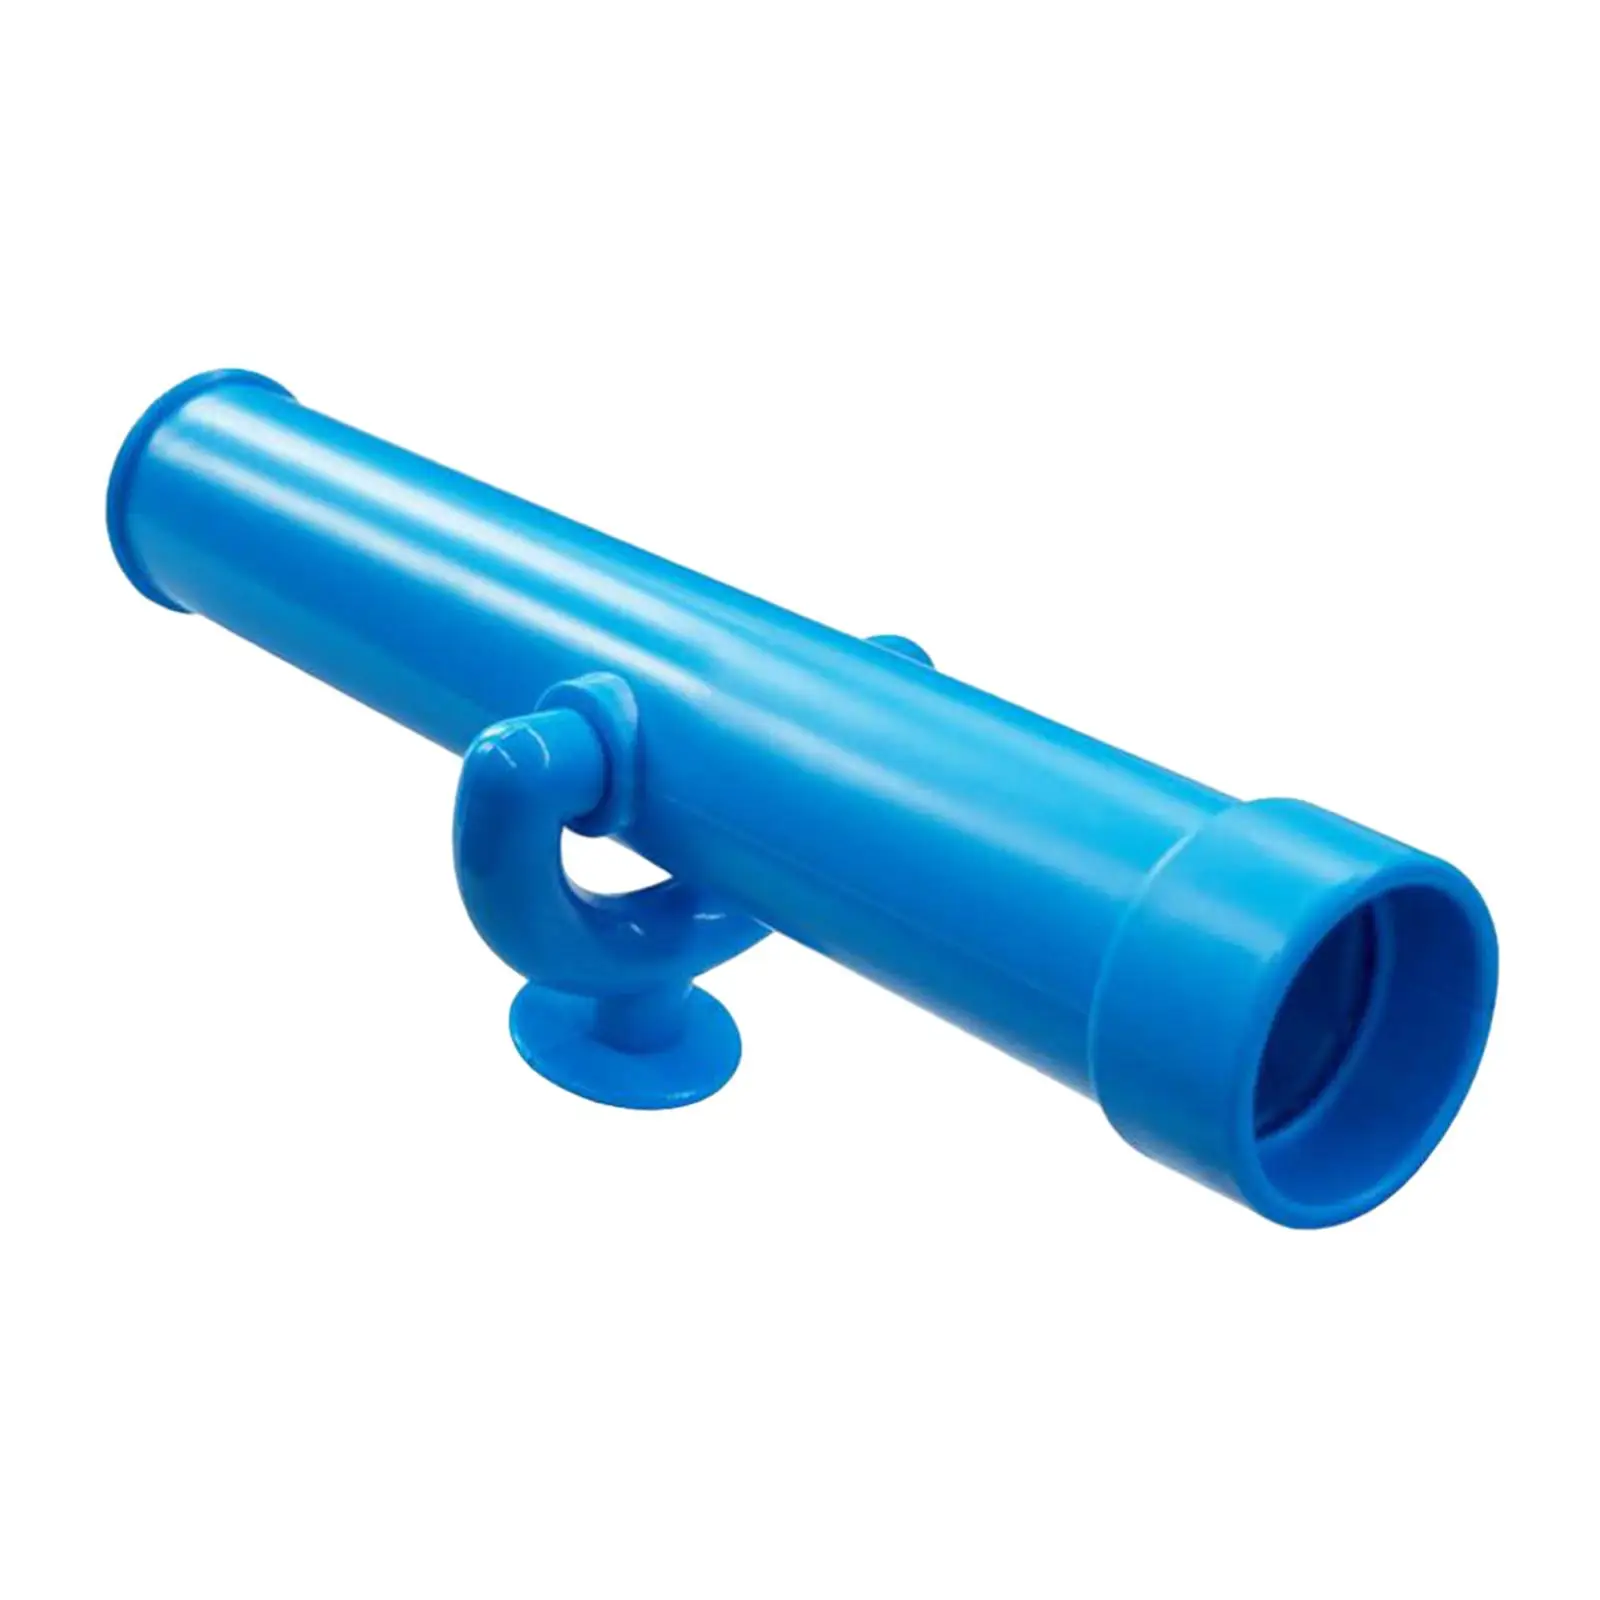 Playground Telescope Toy for Kids Educational Toy for Outdoor Jungle